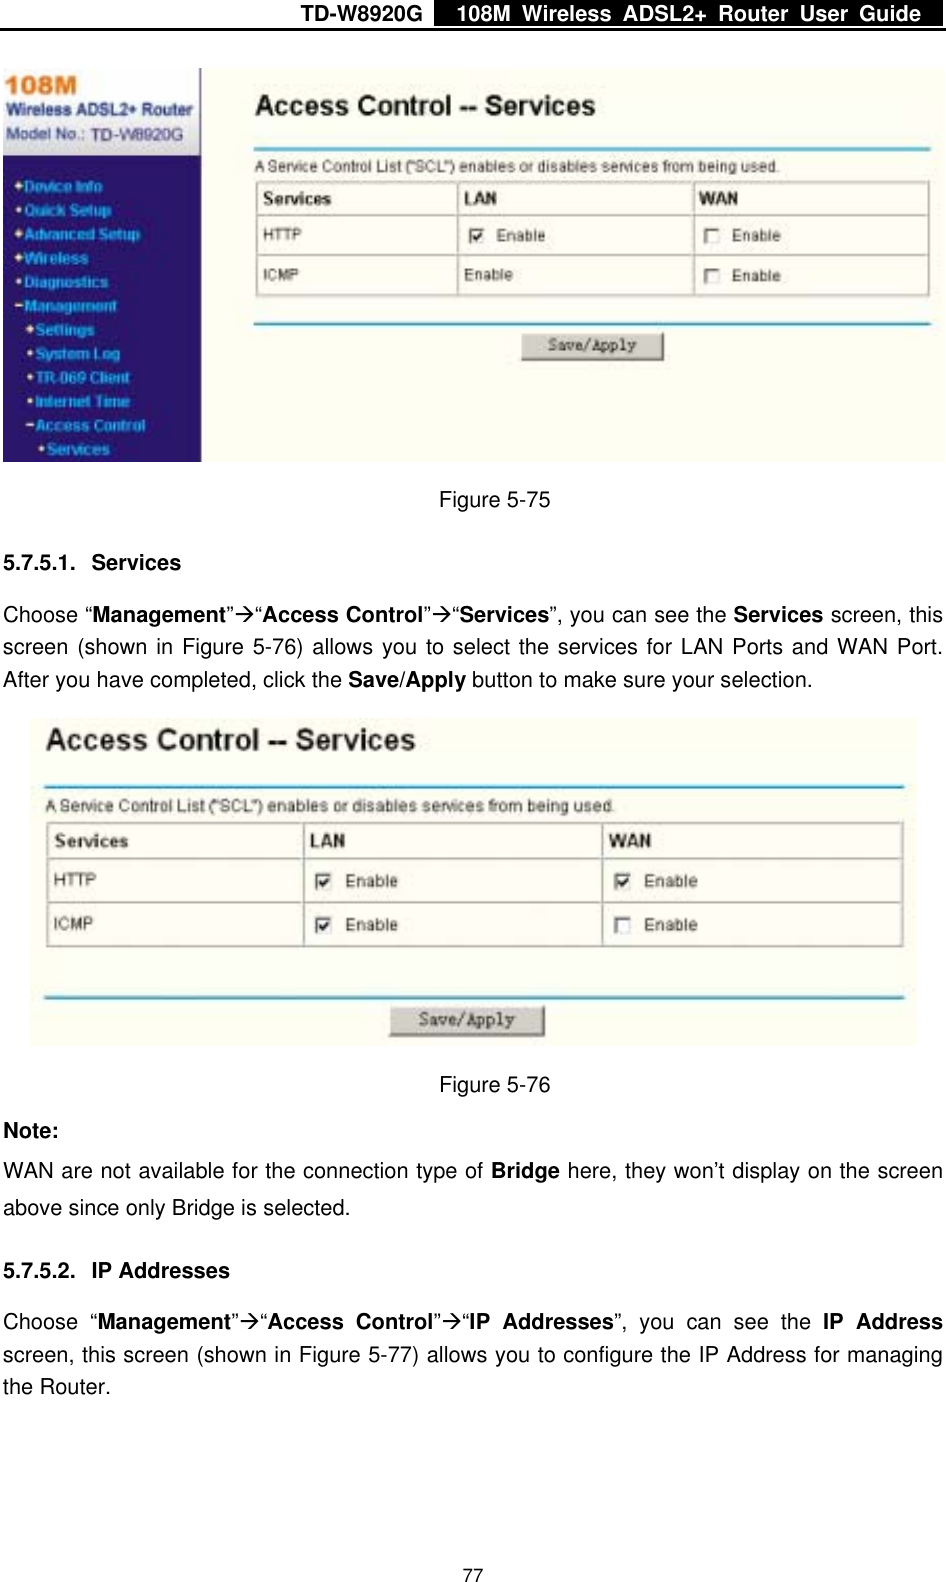 TD-W8920G    108M Wireless ADSL2+ Router User Guide    77 Figure 5-75 5.7.5.1. Services Choose “Management”Æ“Access Control”Æ“Services”, you can see the Services screen, this screen (shown in Figure 5-76) allows you to select the services for LAN Ports and WAN Port. After you have completed, click the Save/Apply button to make sure your selection.  Figure 5-76 Note: WAN are not available for the connection type of Bridge here, they won’t display on the screen above since only Bridge is selected. 5.7.5.2. IP Addresses Choose “Management”Æ“Access Control”Æ“IP Addresses”, you can see the IP Address screen, this screen (shown in Figure 5-77) allows you to configure the IP Address for managing the Router. 